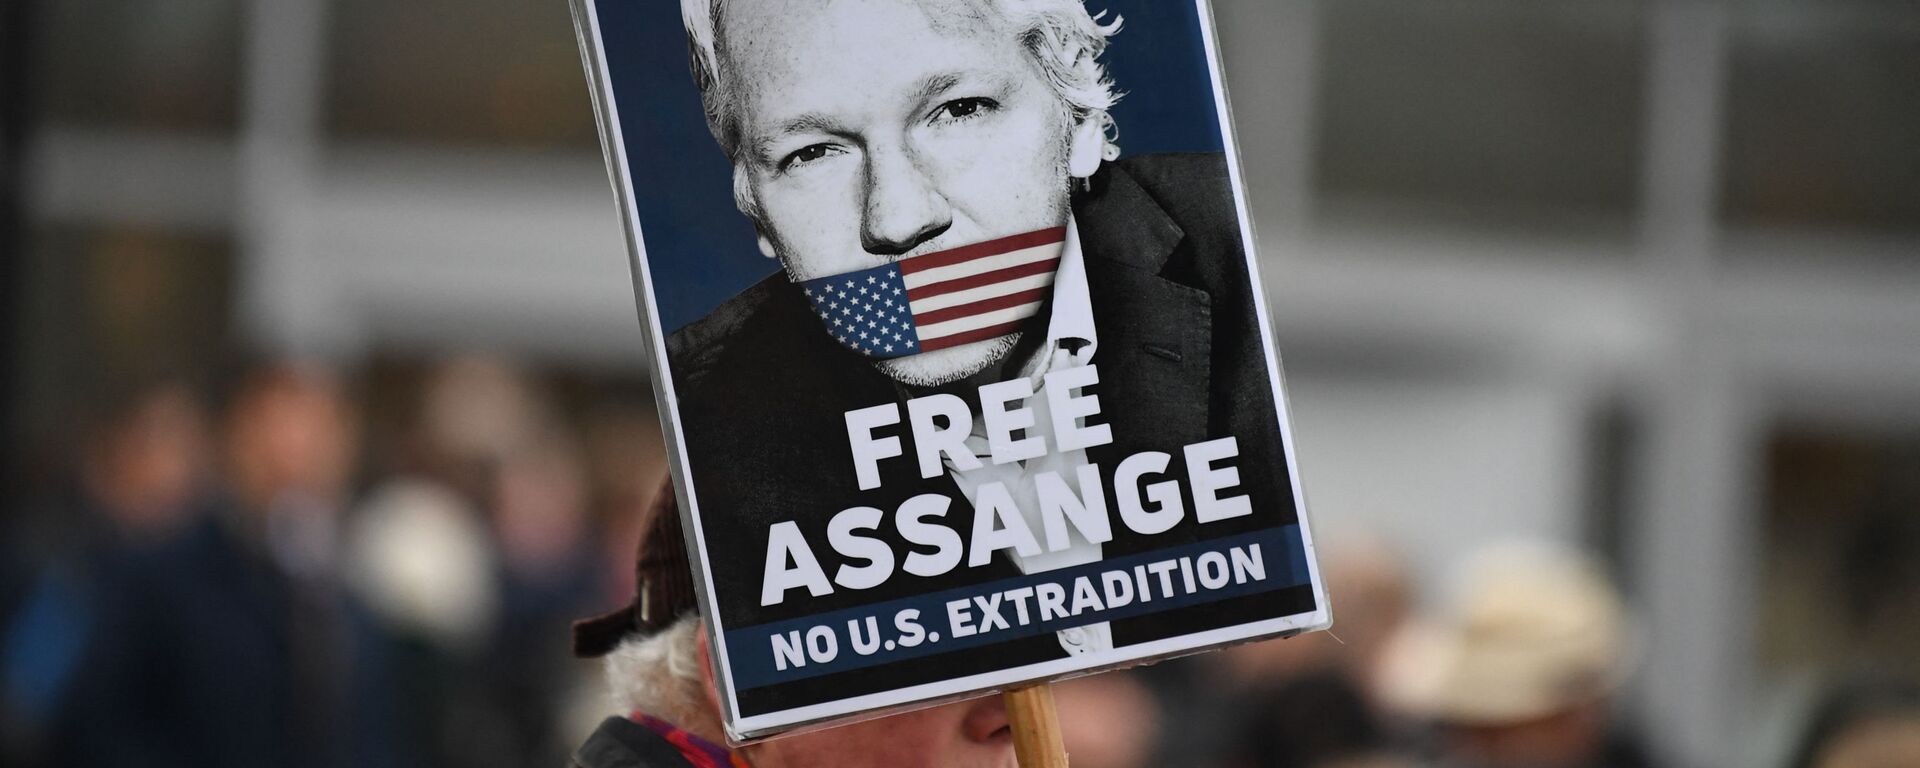 A supporter of WikiLeaks founder Julian Assange holds a placard calling for his freedom outside Woolwich Crown Court and HMP Belmarsh prison in southeast London on February 24, 2020, ahead of the opening of the trial to hear a US request for Assange's extradition - Sputnik International, 1920, 06.09.2023